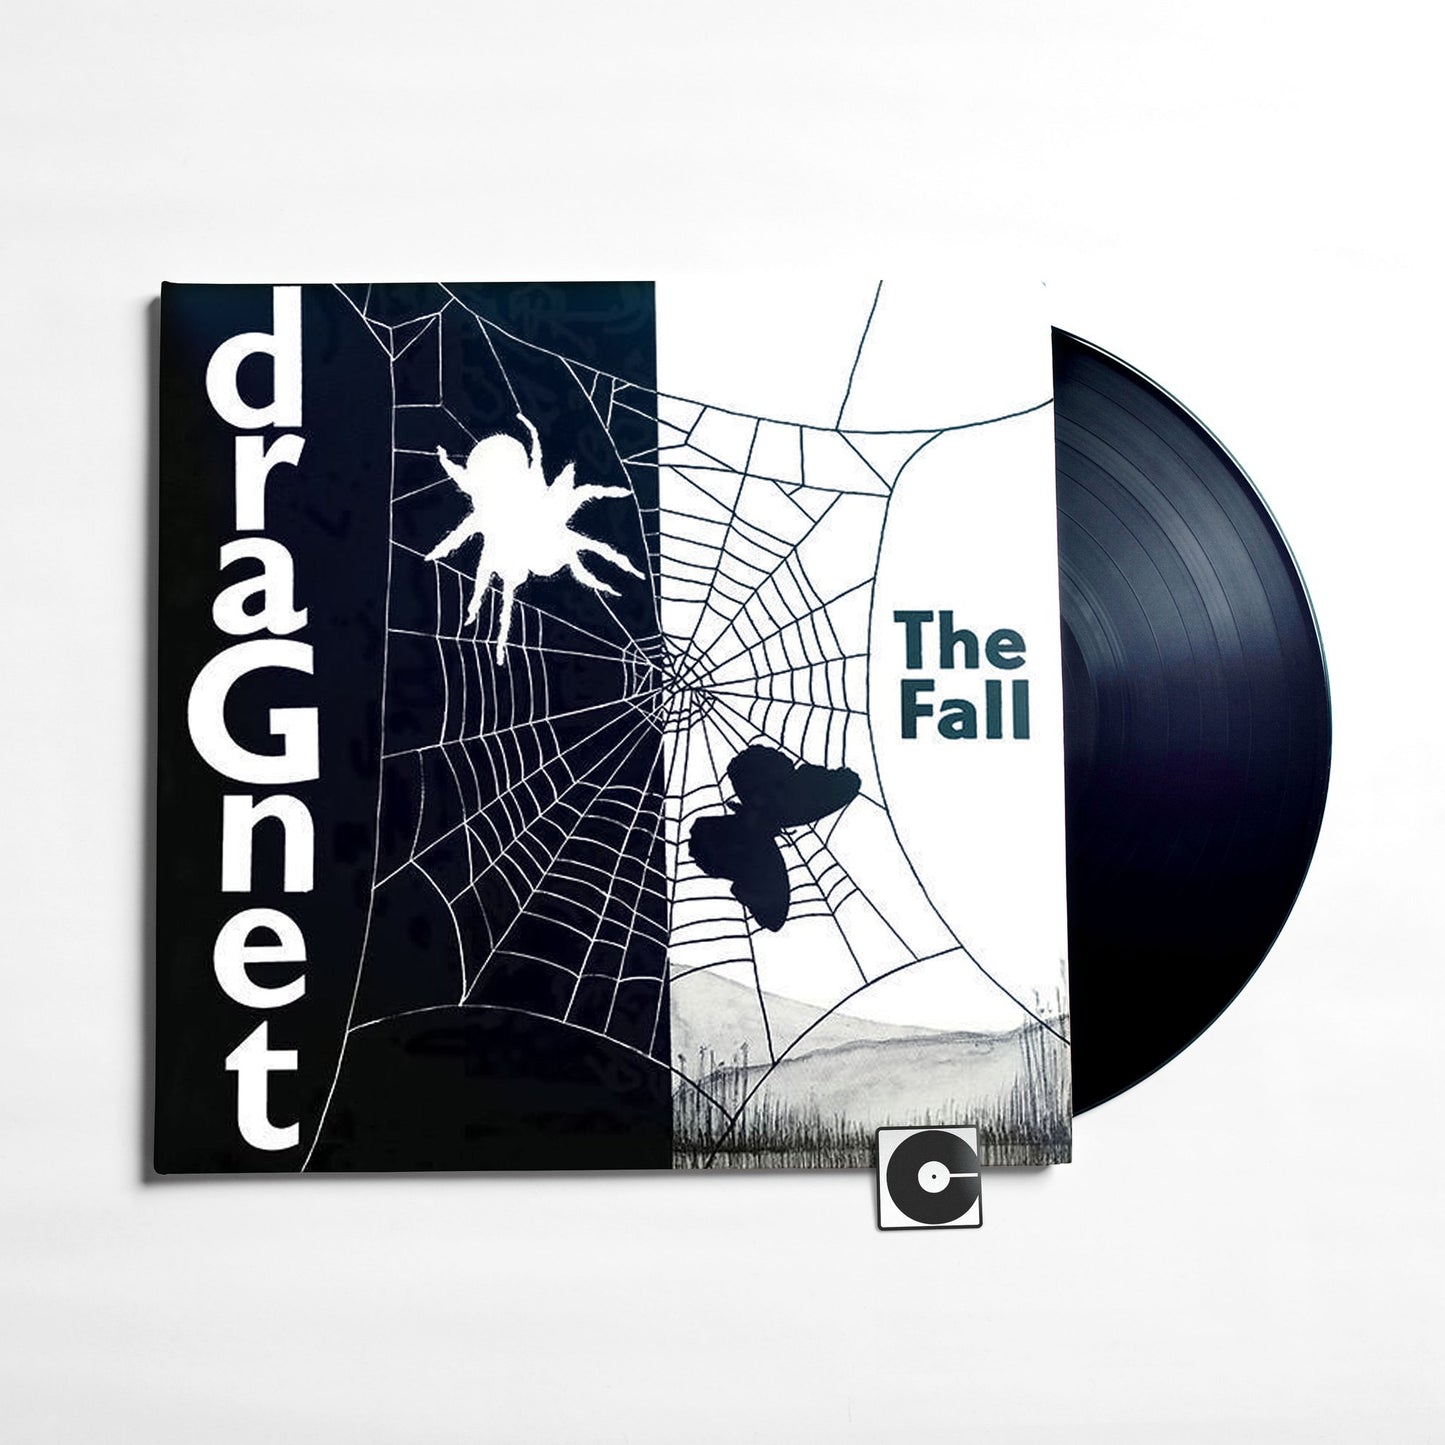 The Fall - "Dragnet"